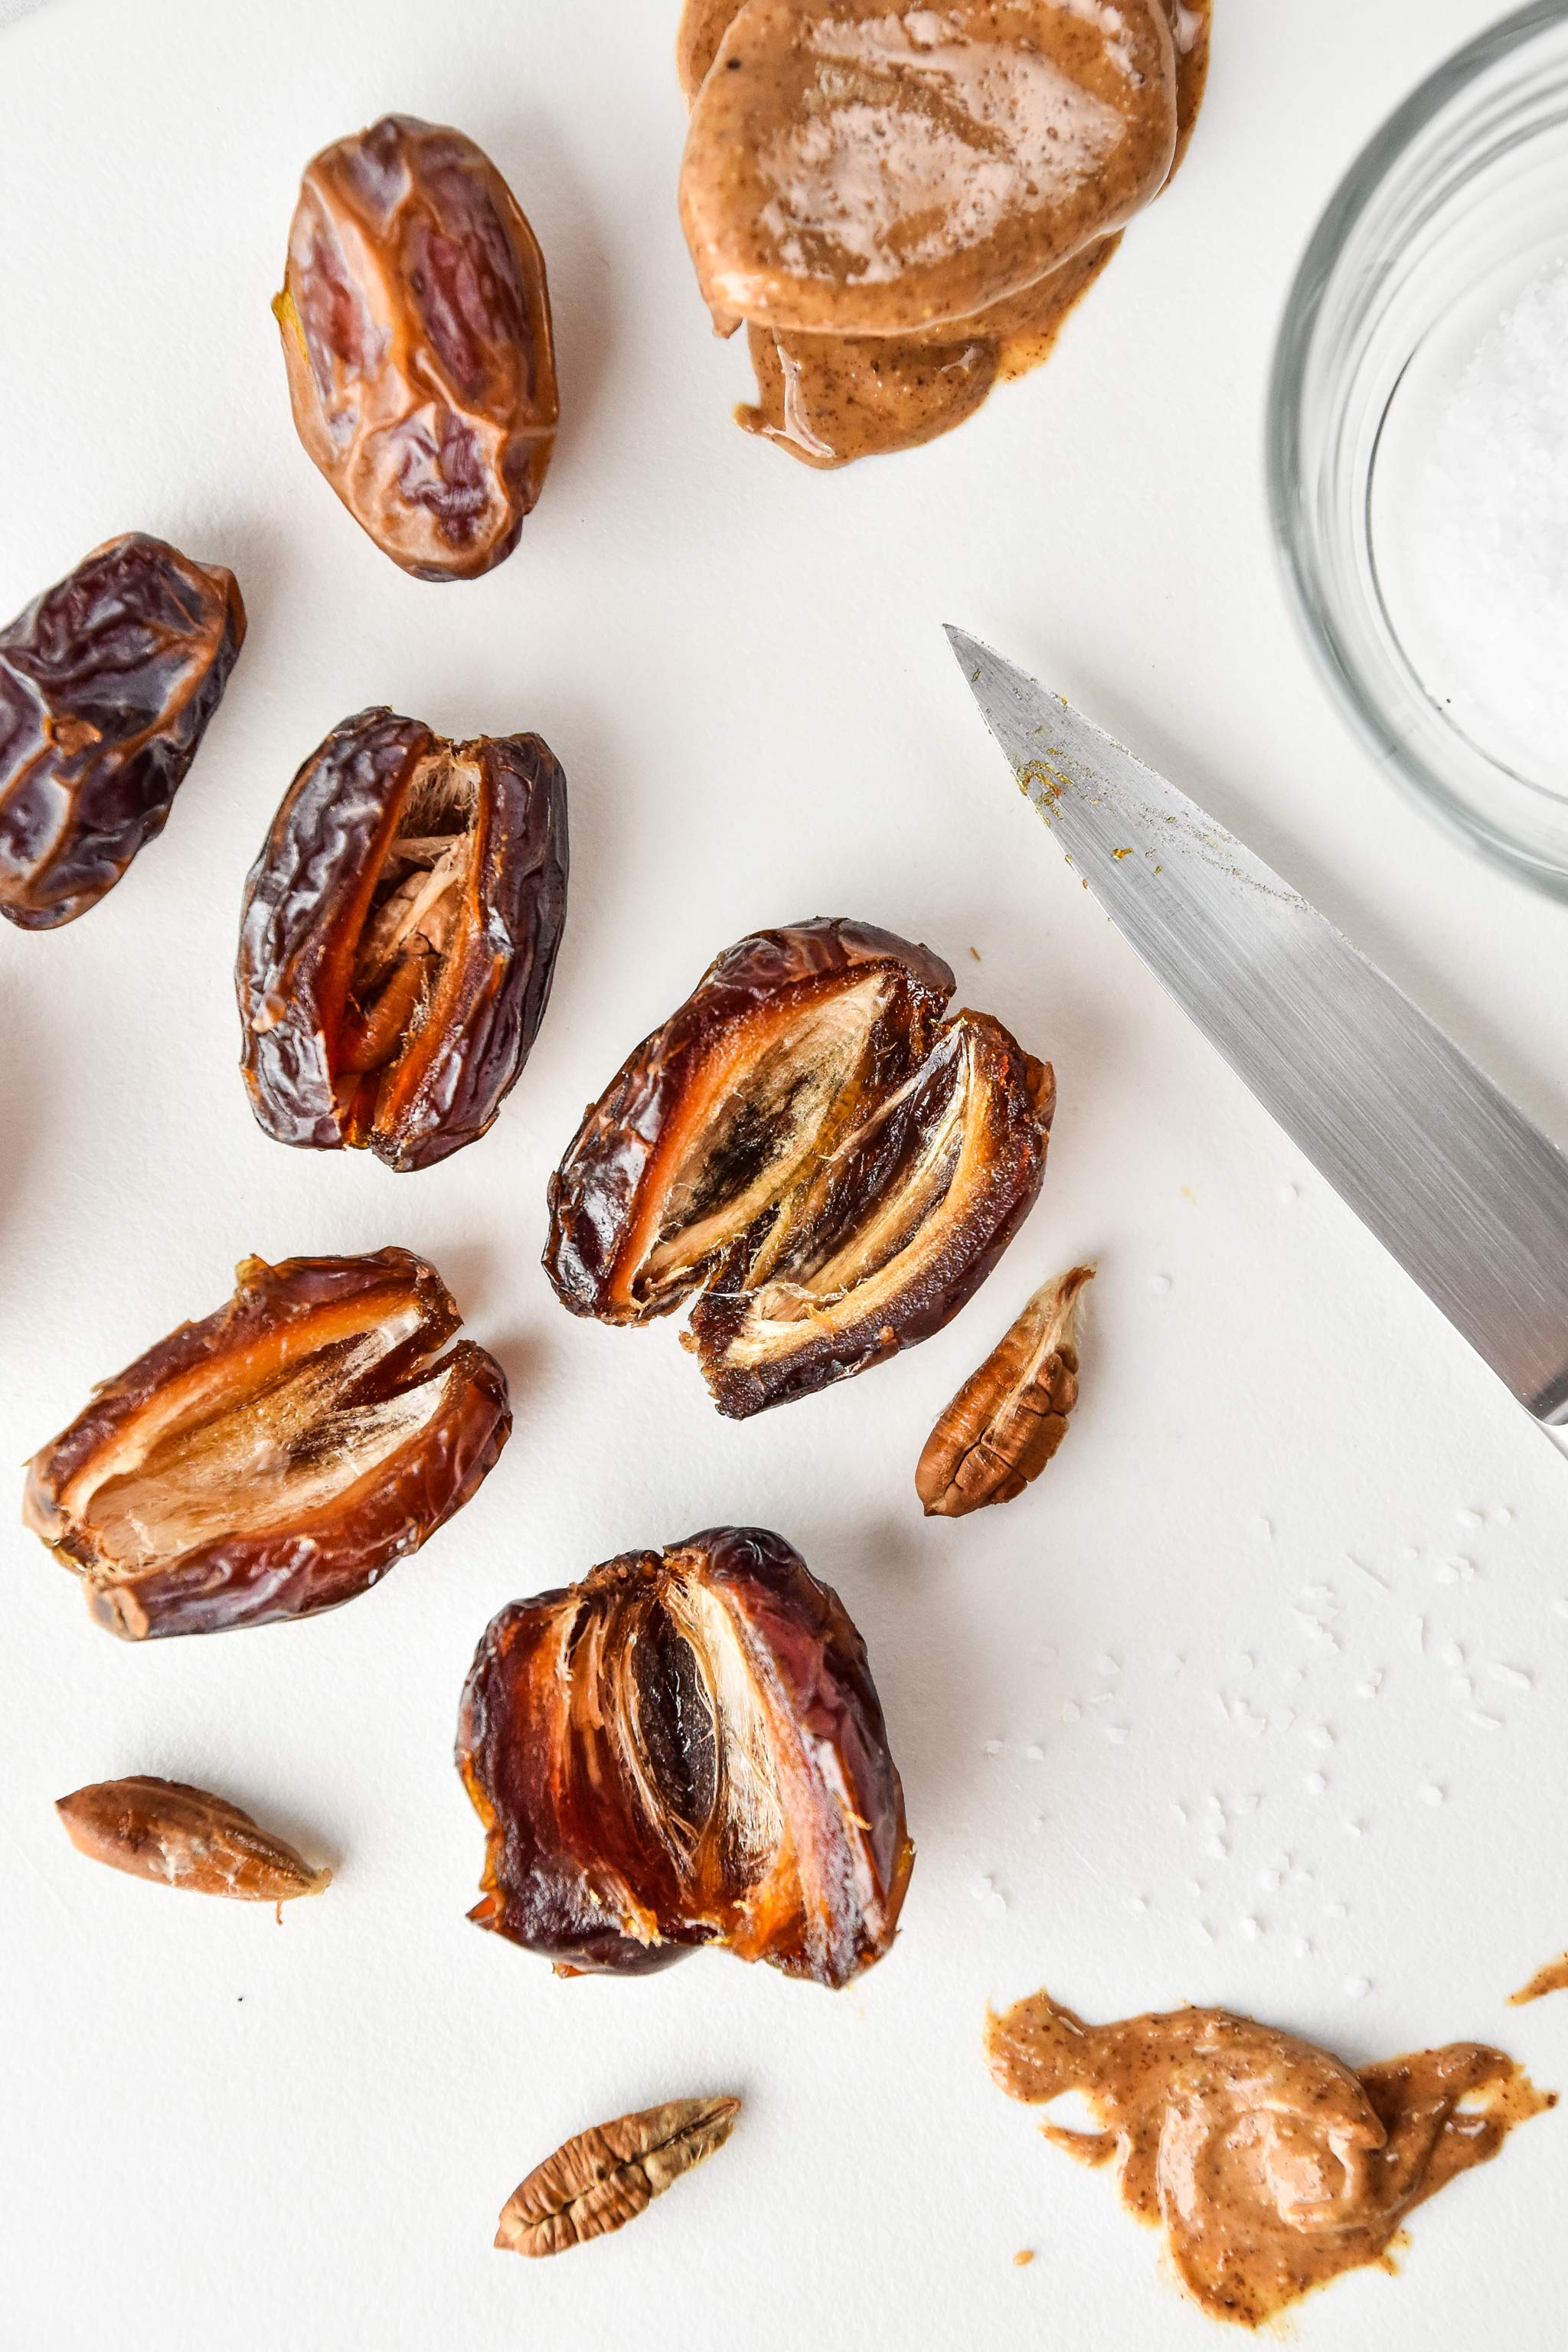 medjool dates with the pits removed ready to be stuffed with almond butter